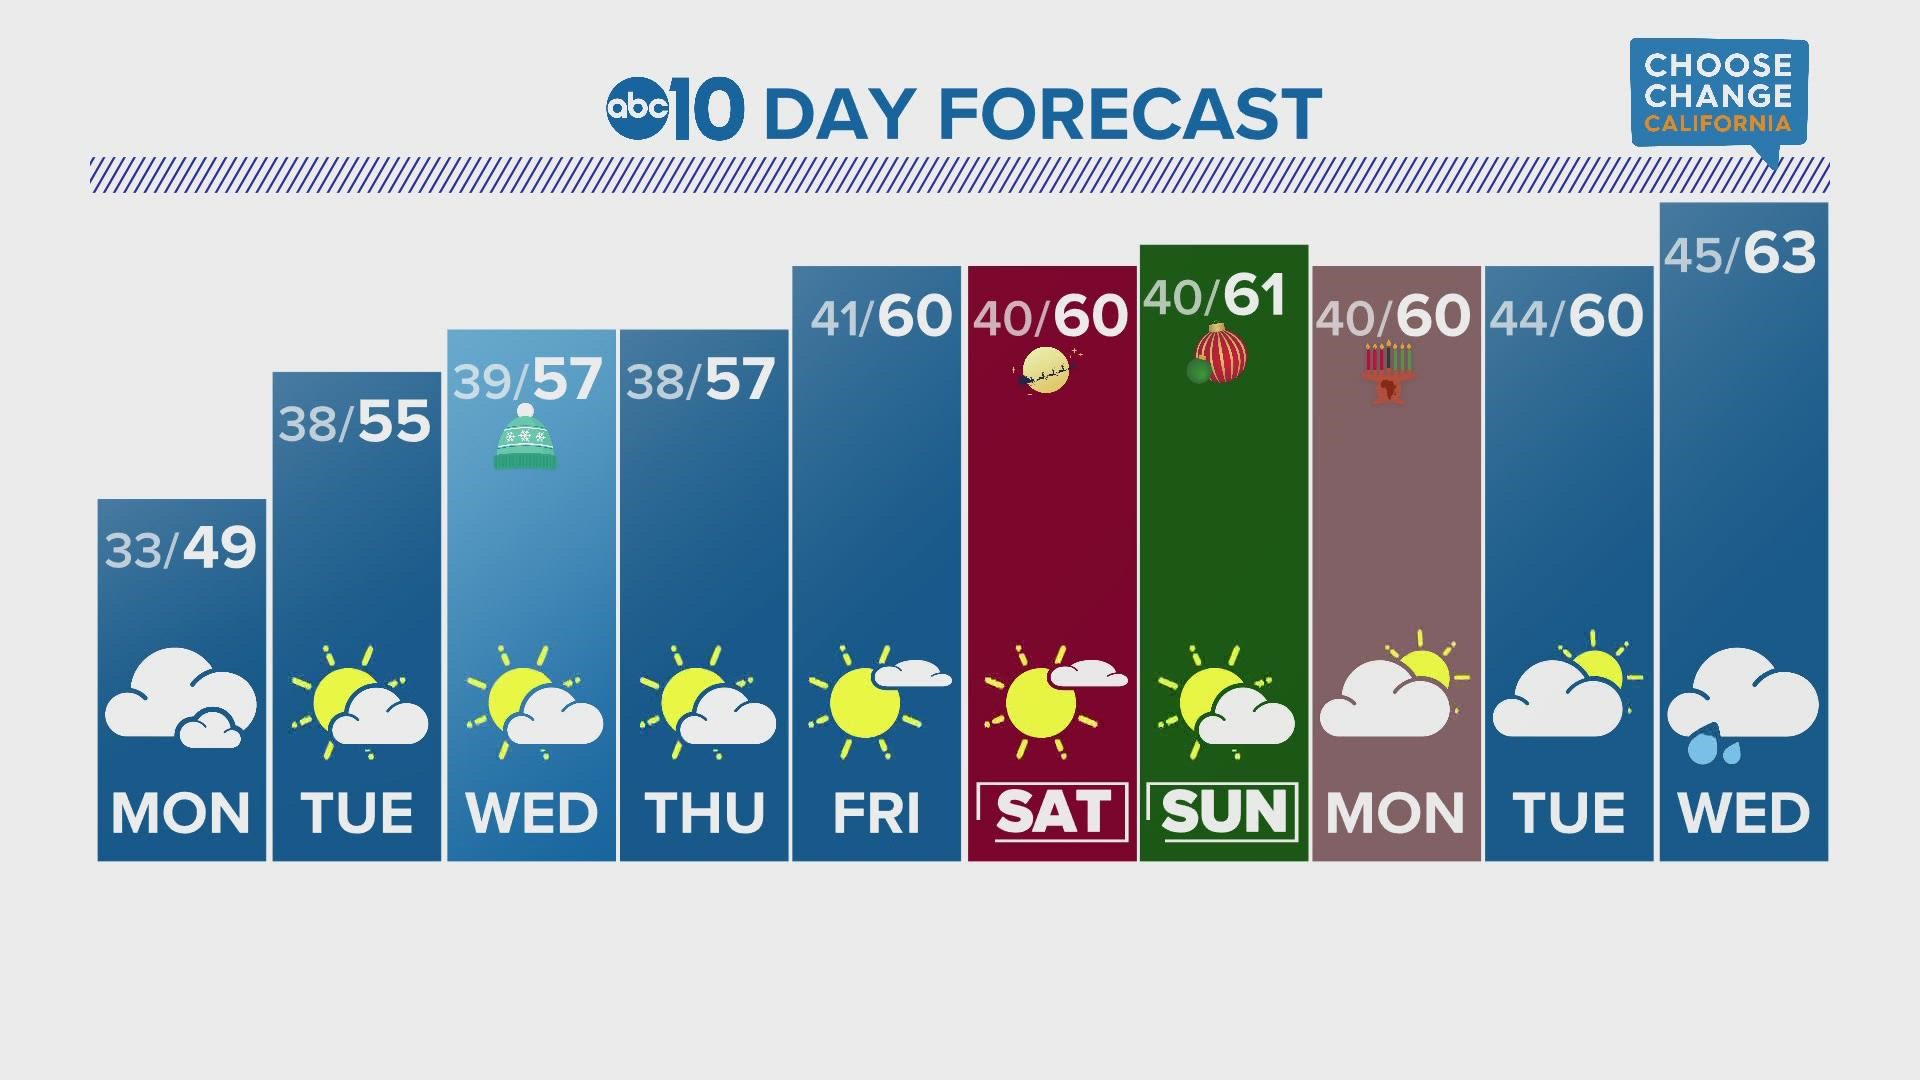 ABC10's Jordan Tolbert tells us what to expect for the next 10 days of weather.